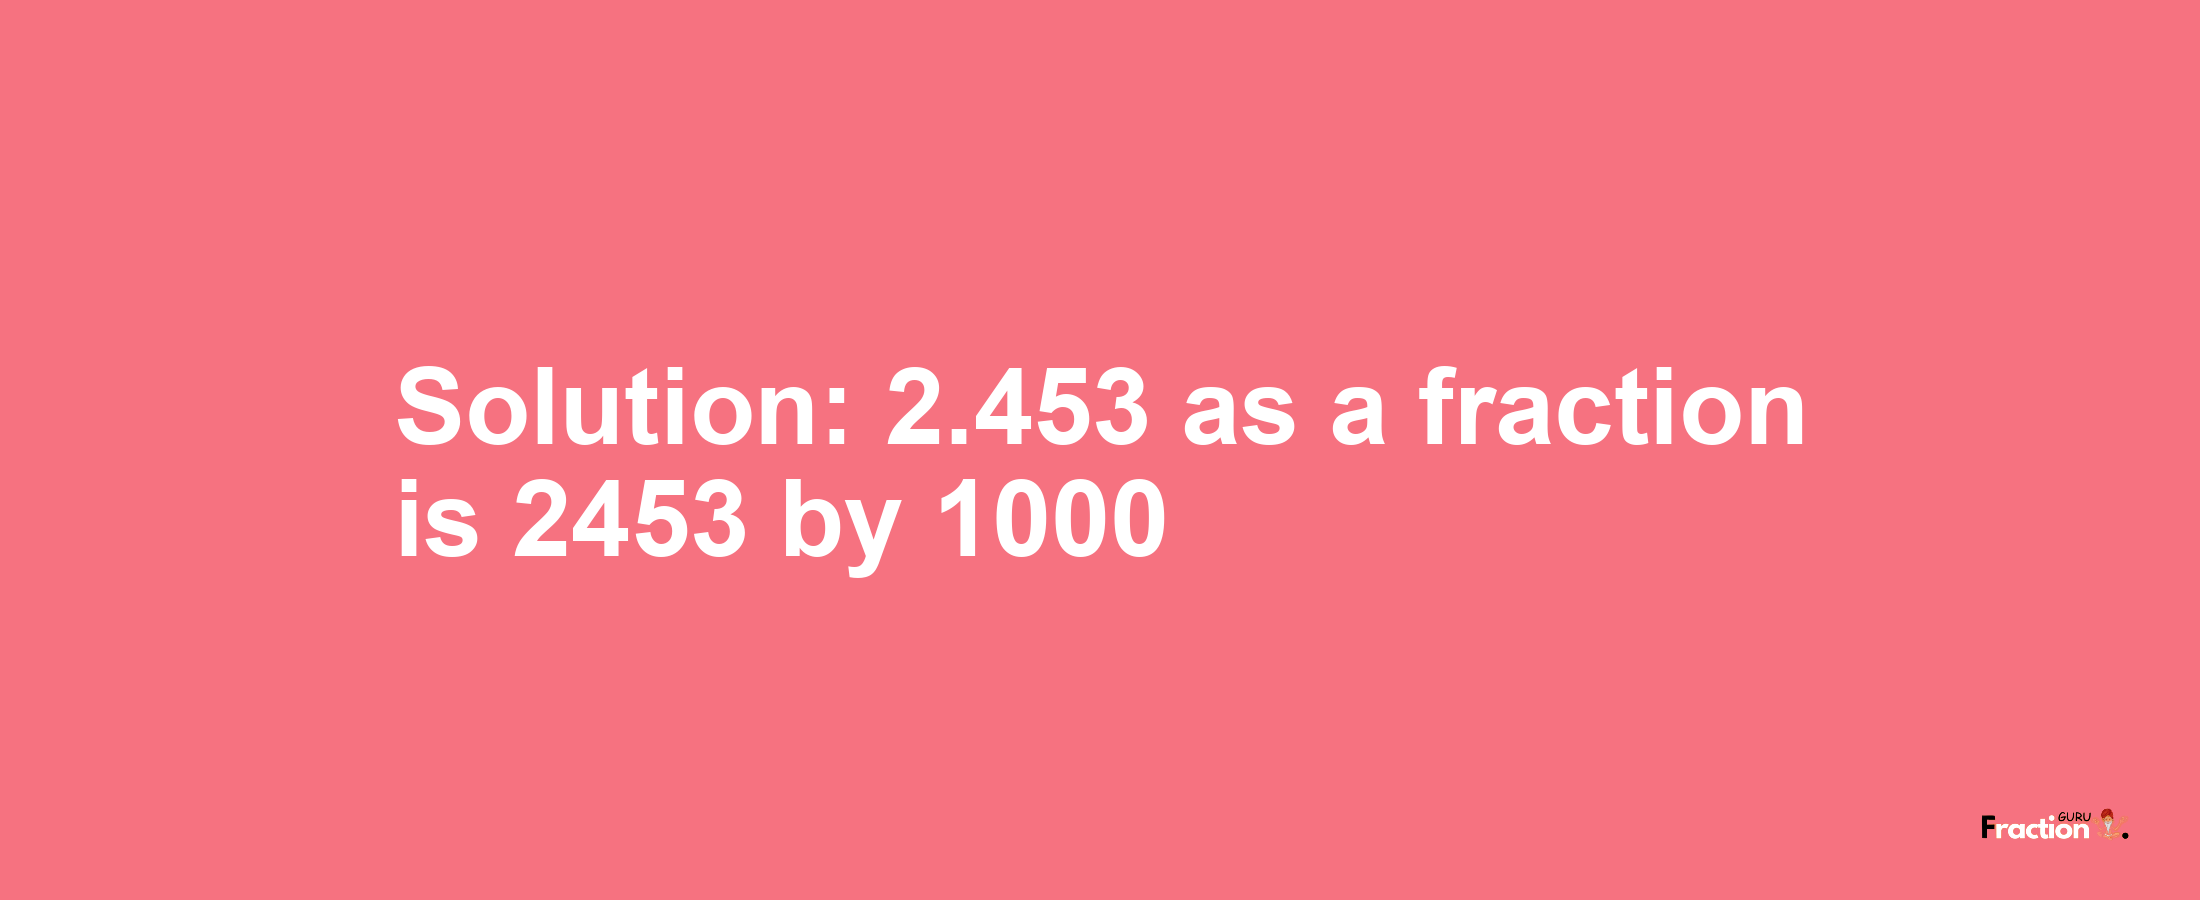 Solution:2.453 as a fraction is 2453/1000